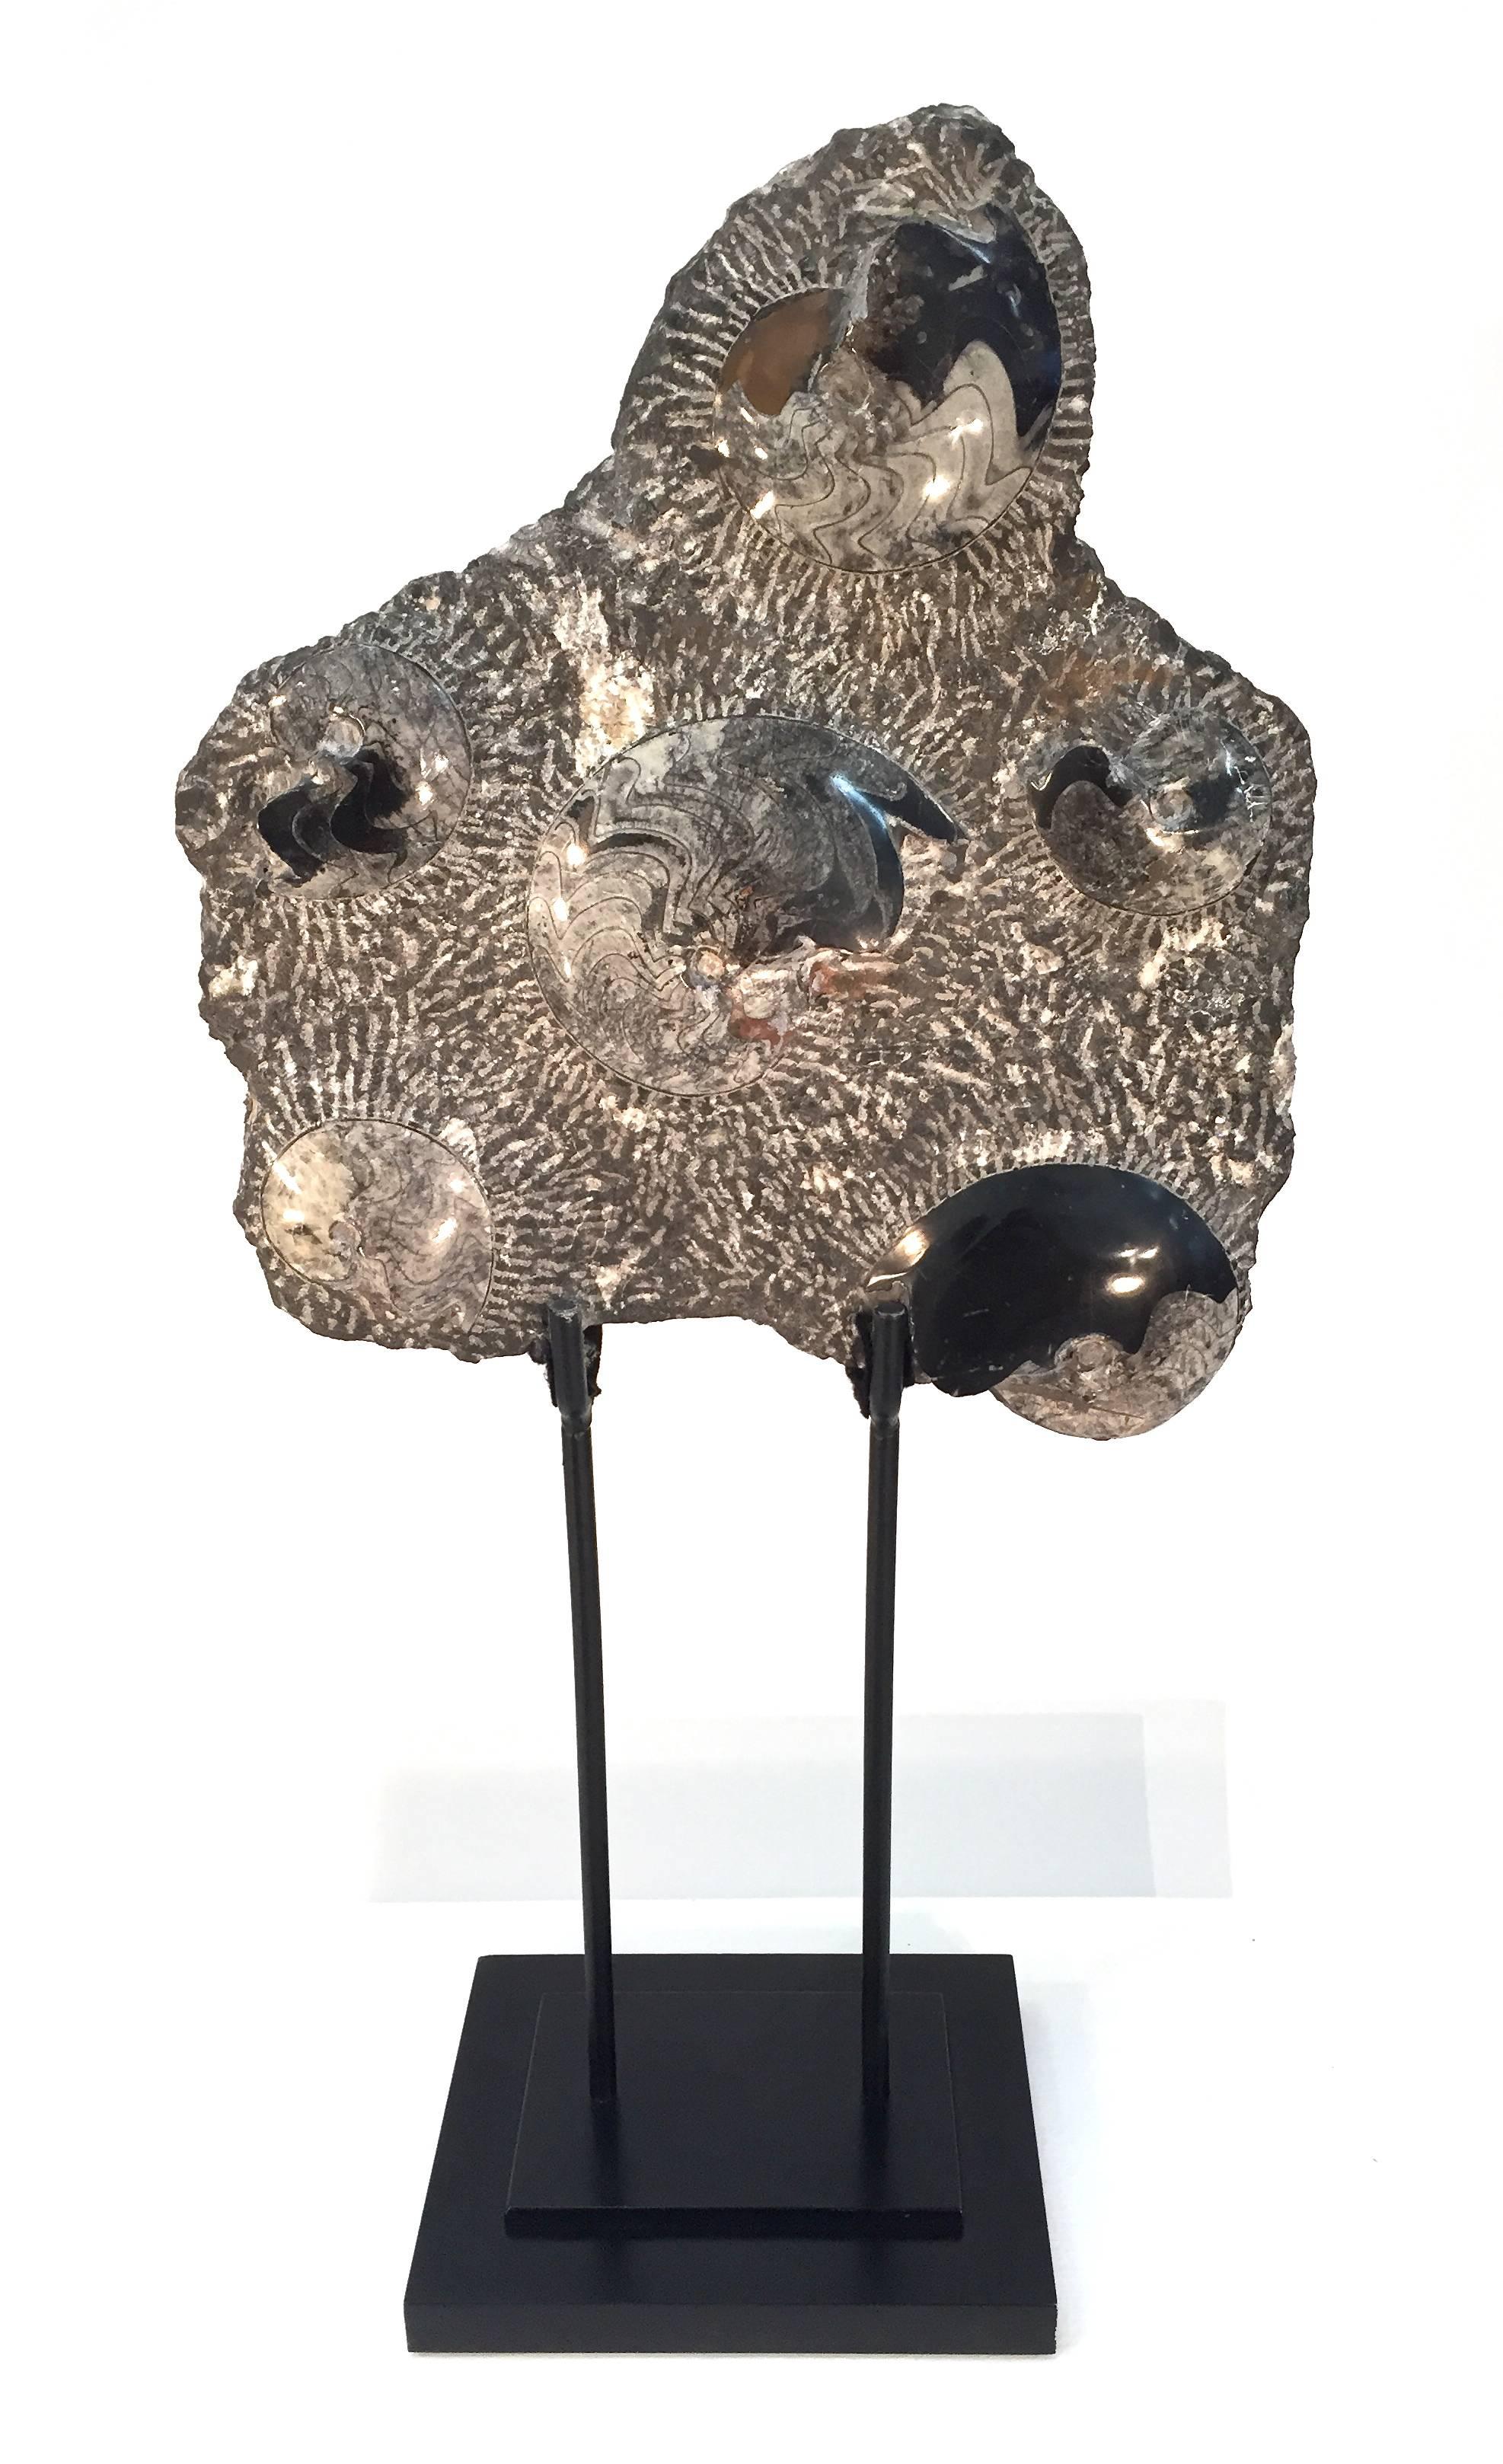 Fossilized ammonite cluster resting on a custom steel display stand.

Height in the measurement description field is including the Stand.